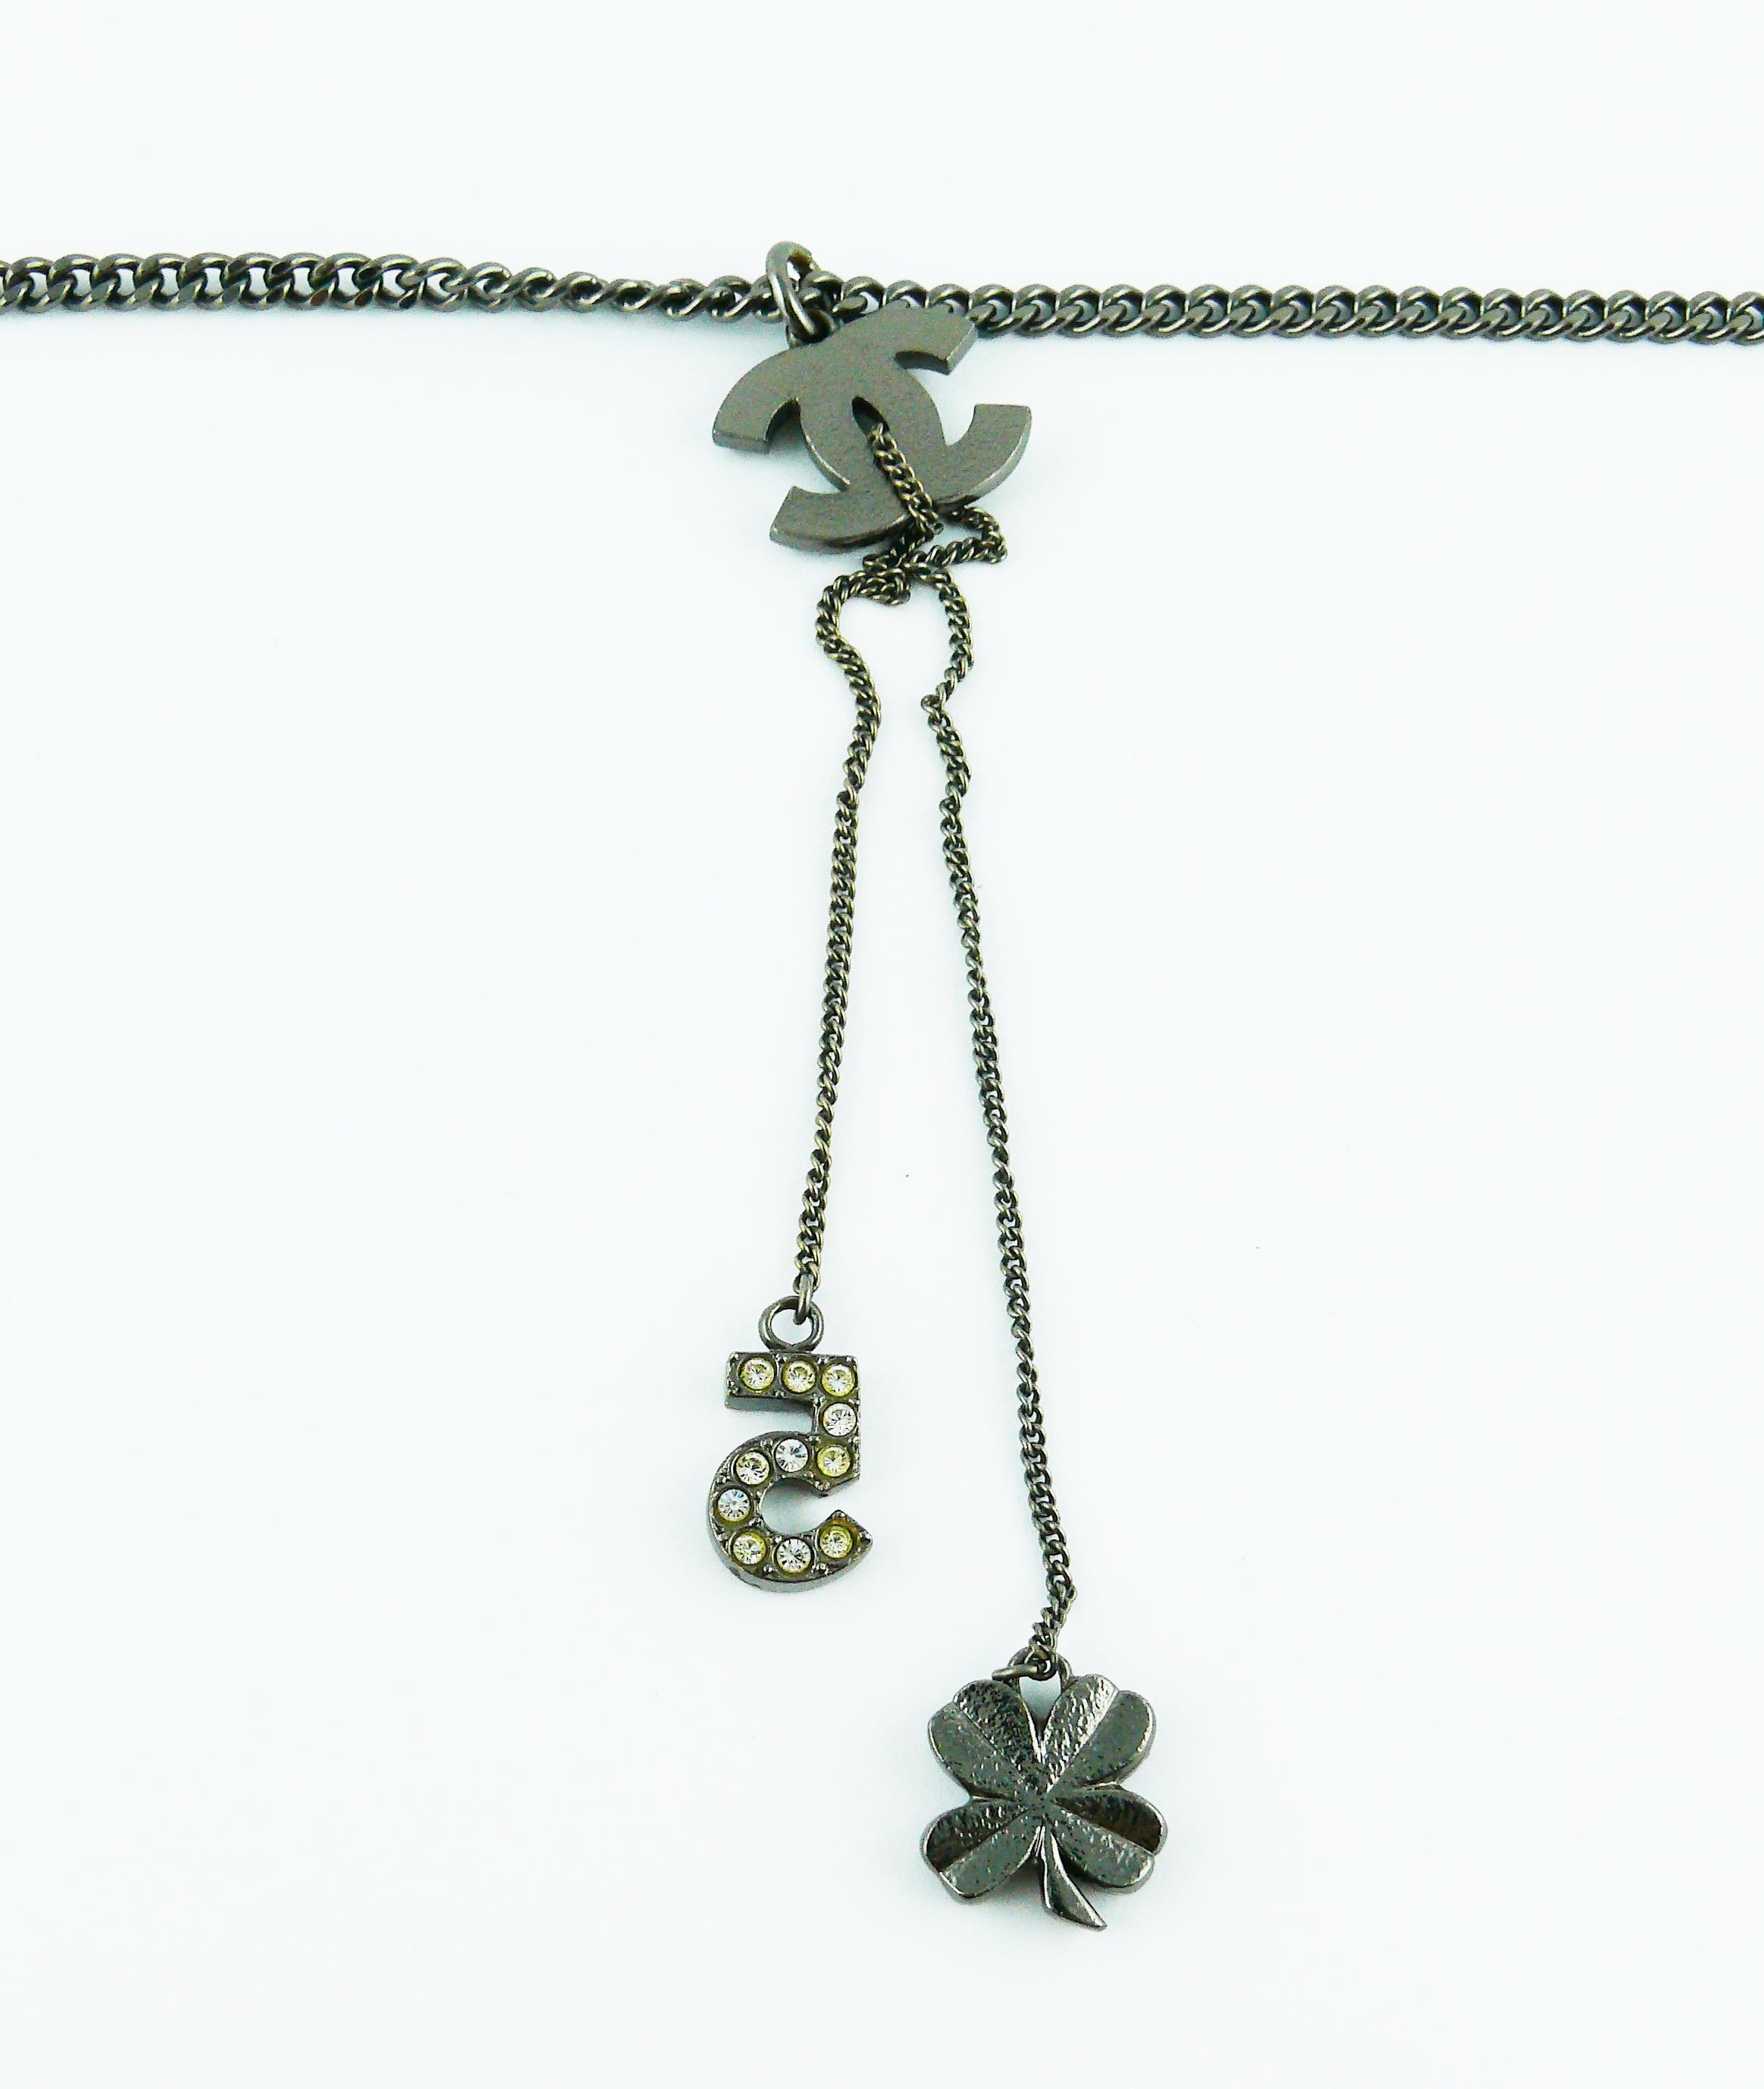 Chanel Ruthenium CC Pendant Necklace with N°5 and Clover 6